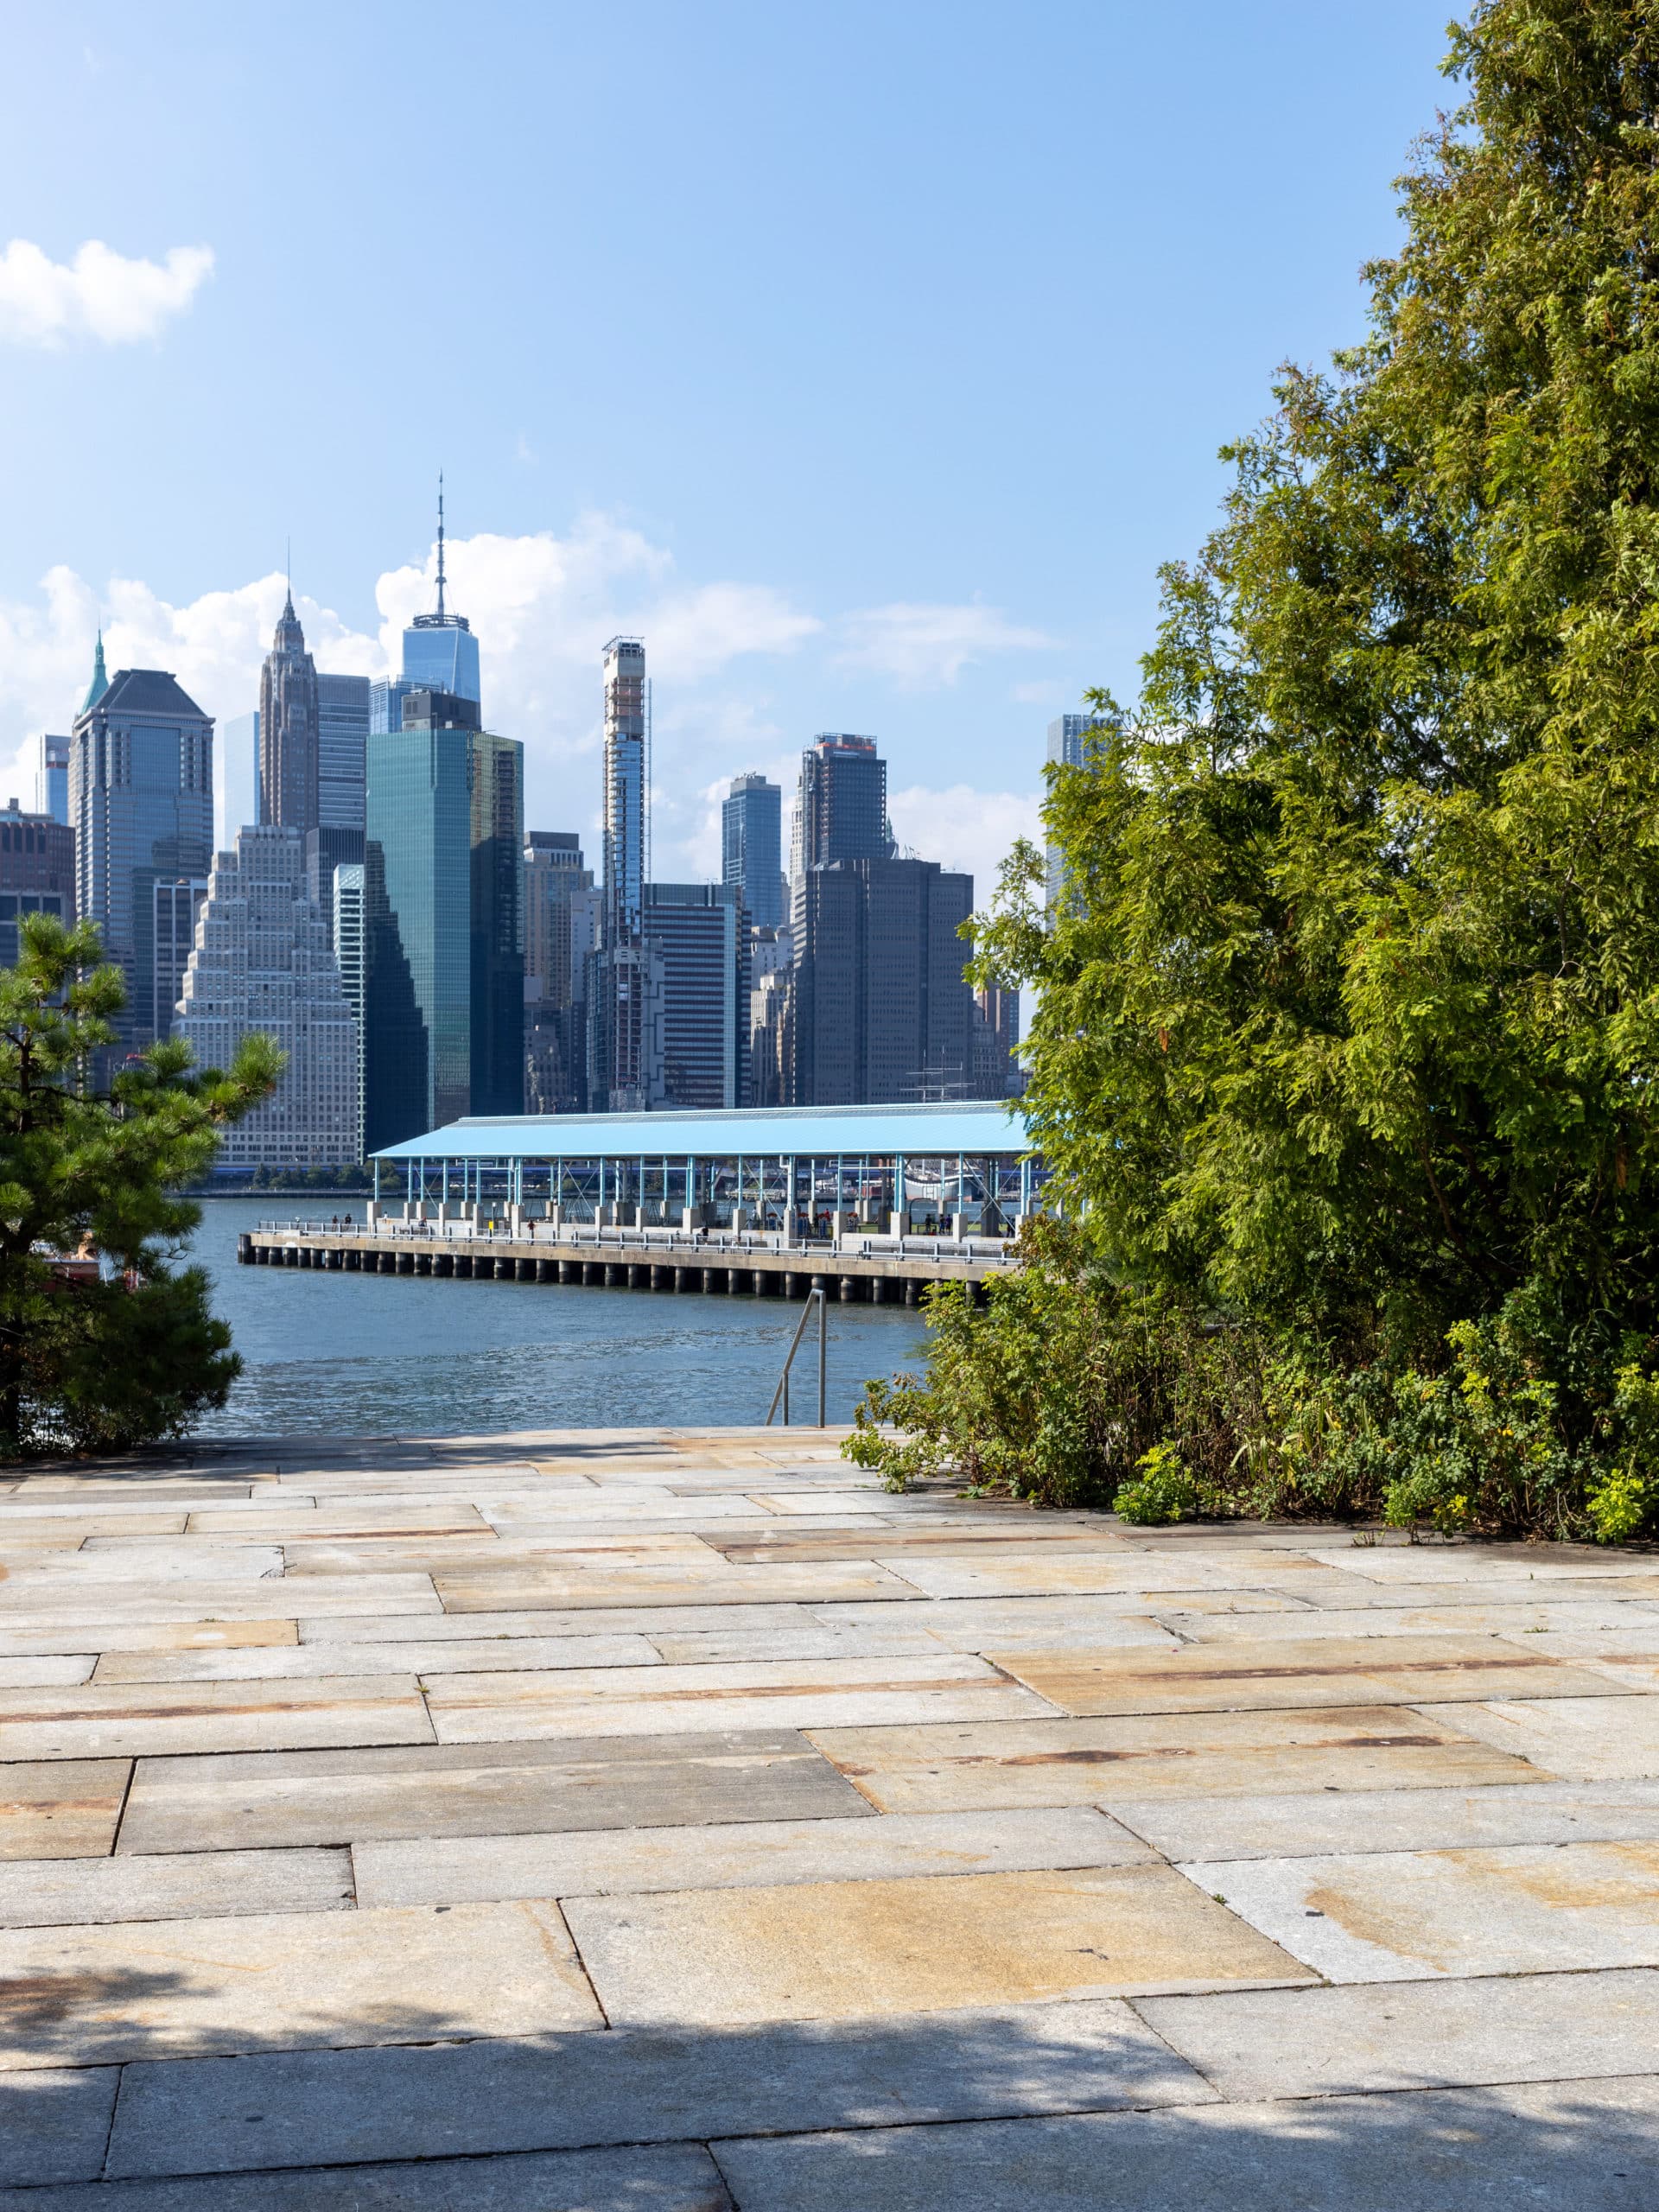 Stone terrace looking out over the water with a view of Pier 2 and lower Manhattan on a sunny day.